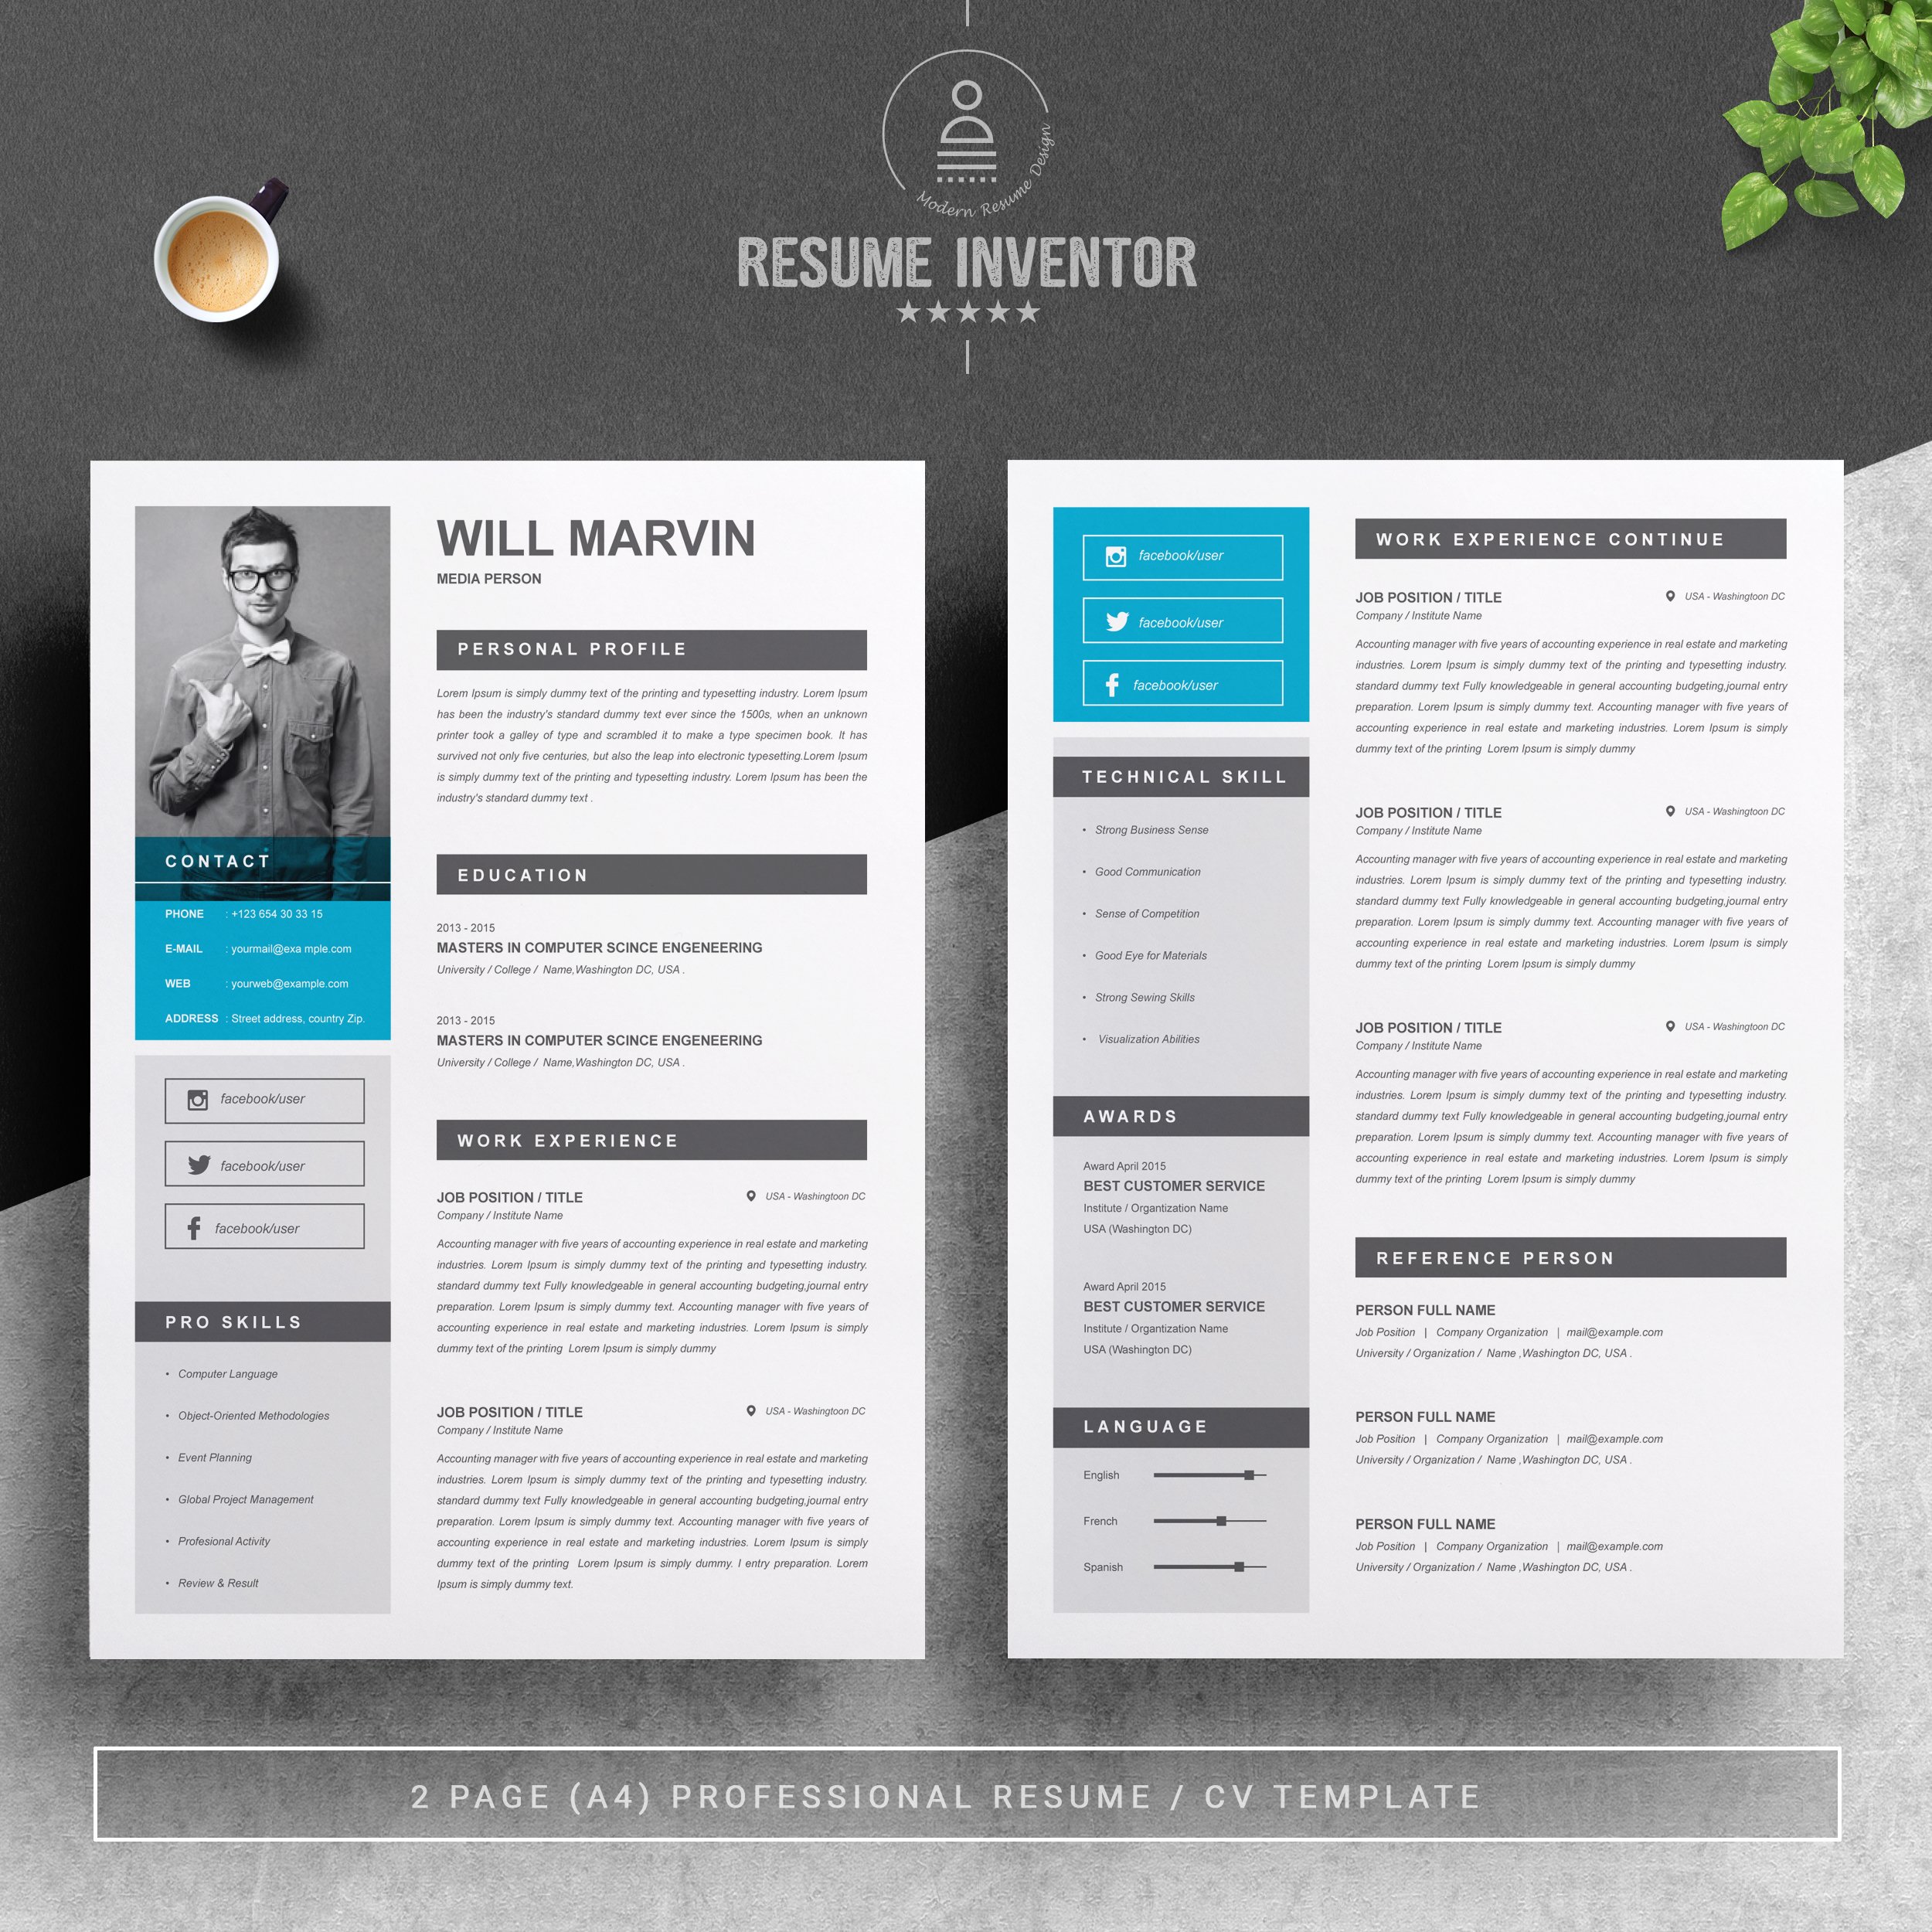 Resume / CV Template | MS Word preview image.